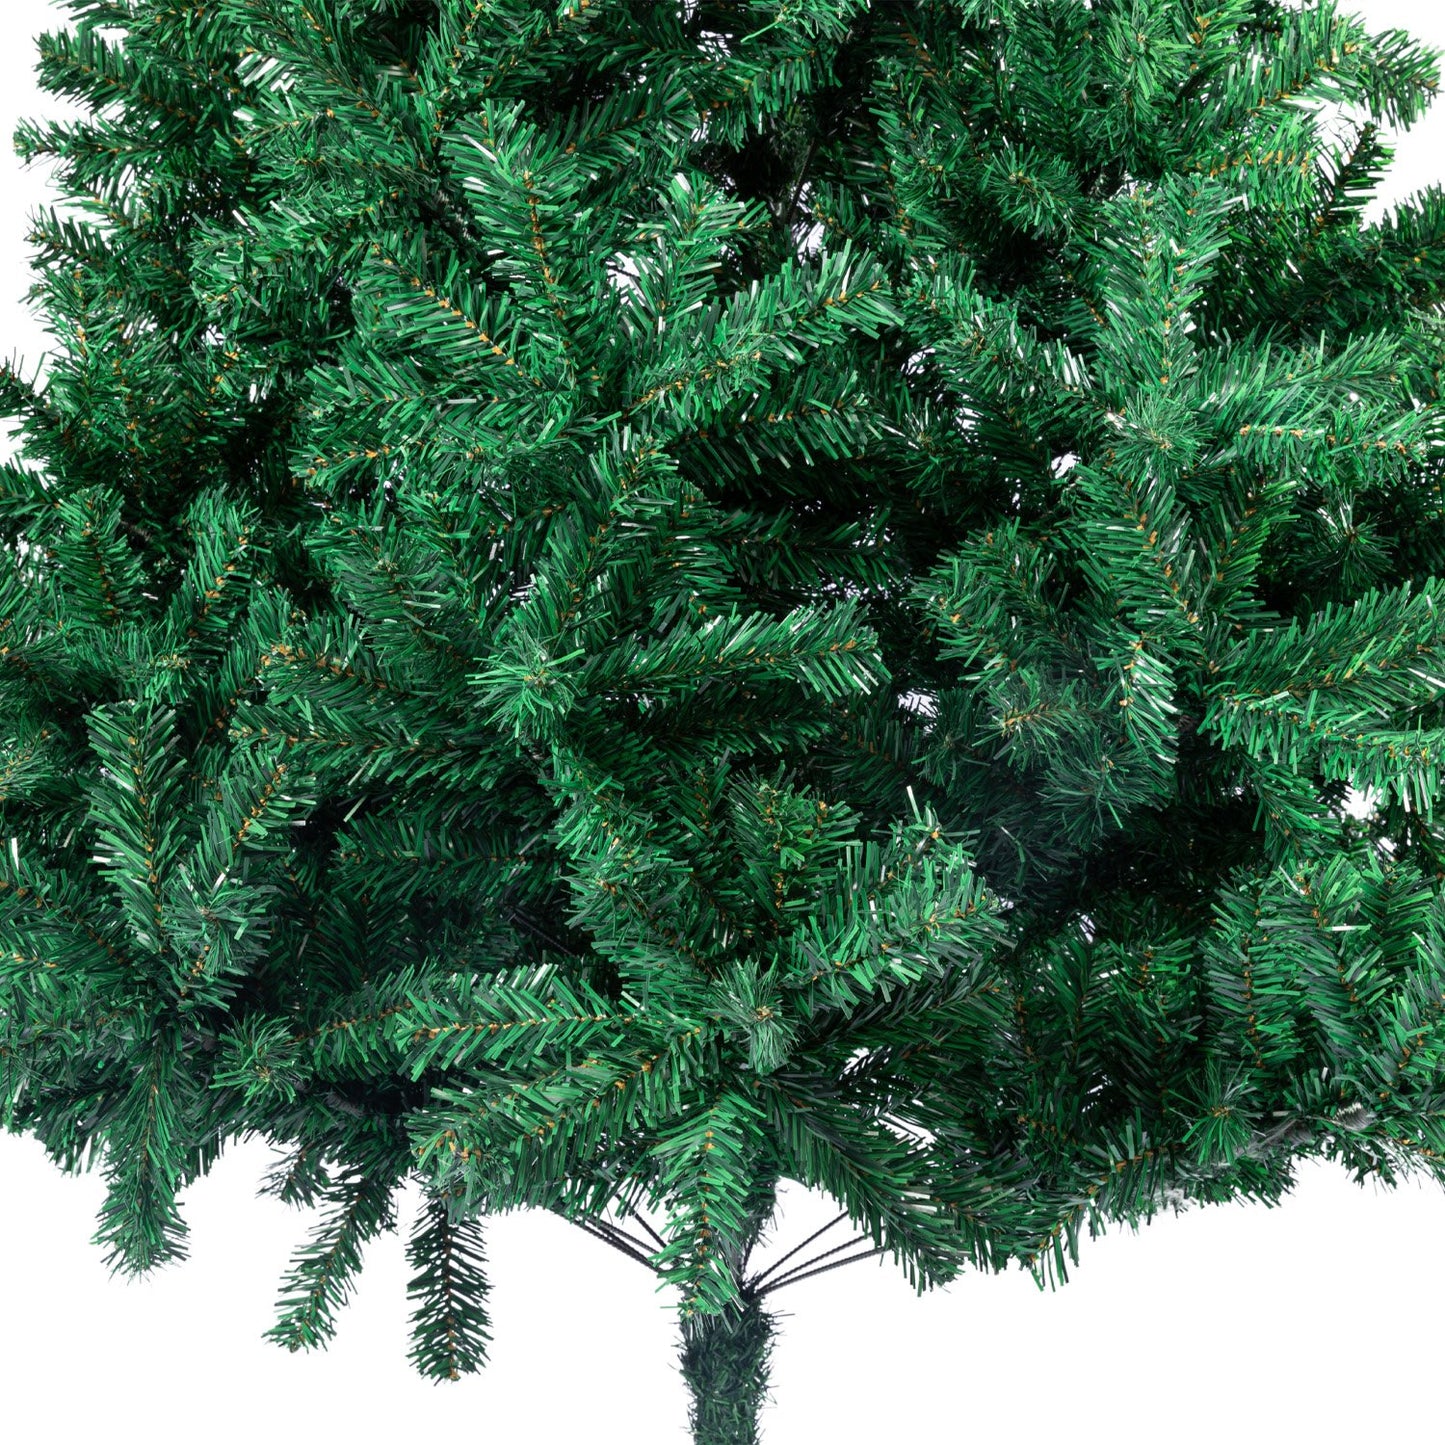 Christabelle Green Christmas Tree 2.4m Xmas Decor Decorations - 1500 Tips